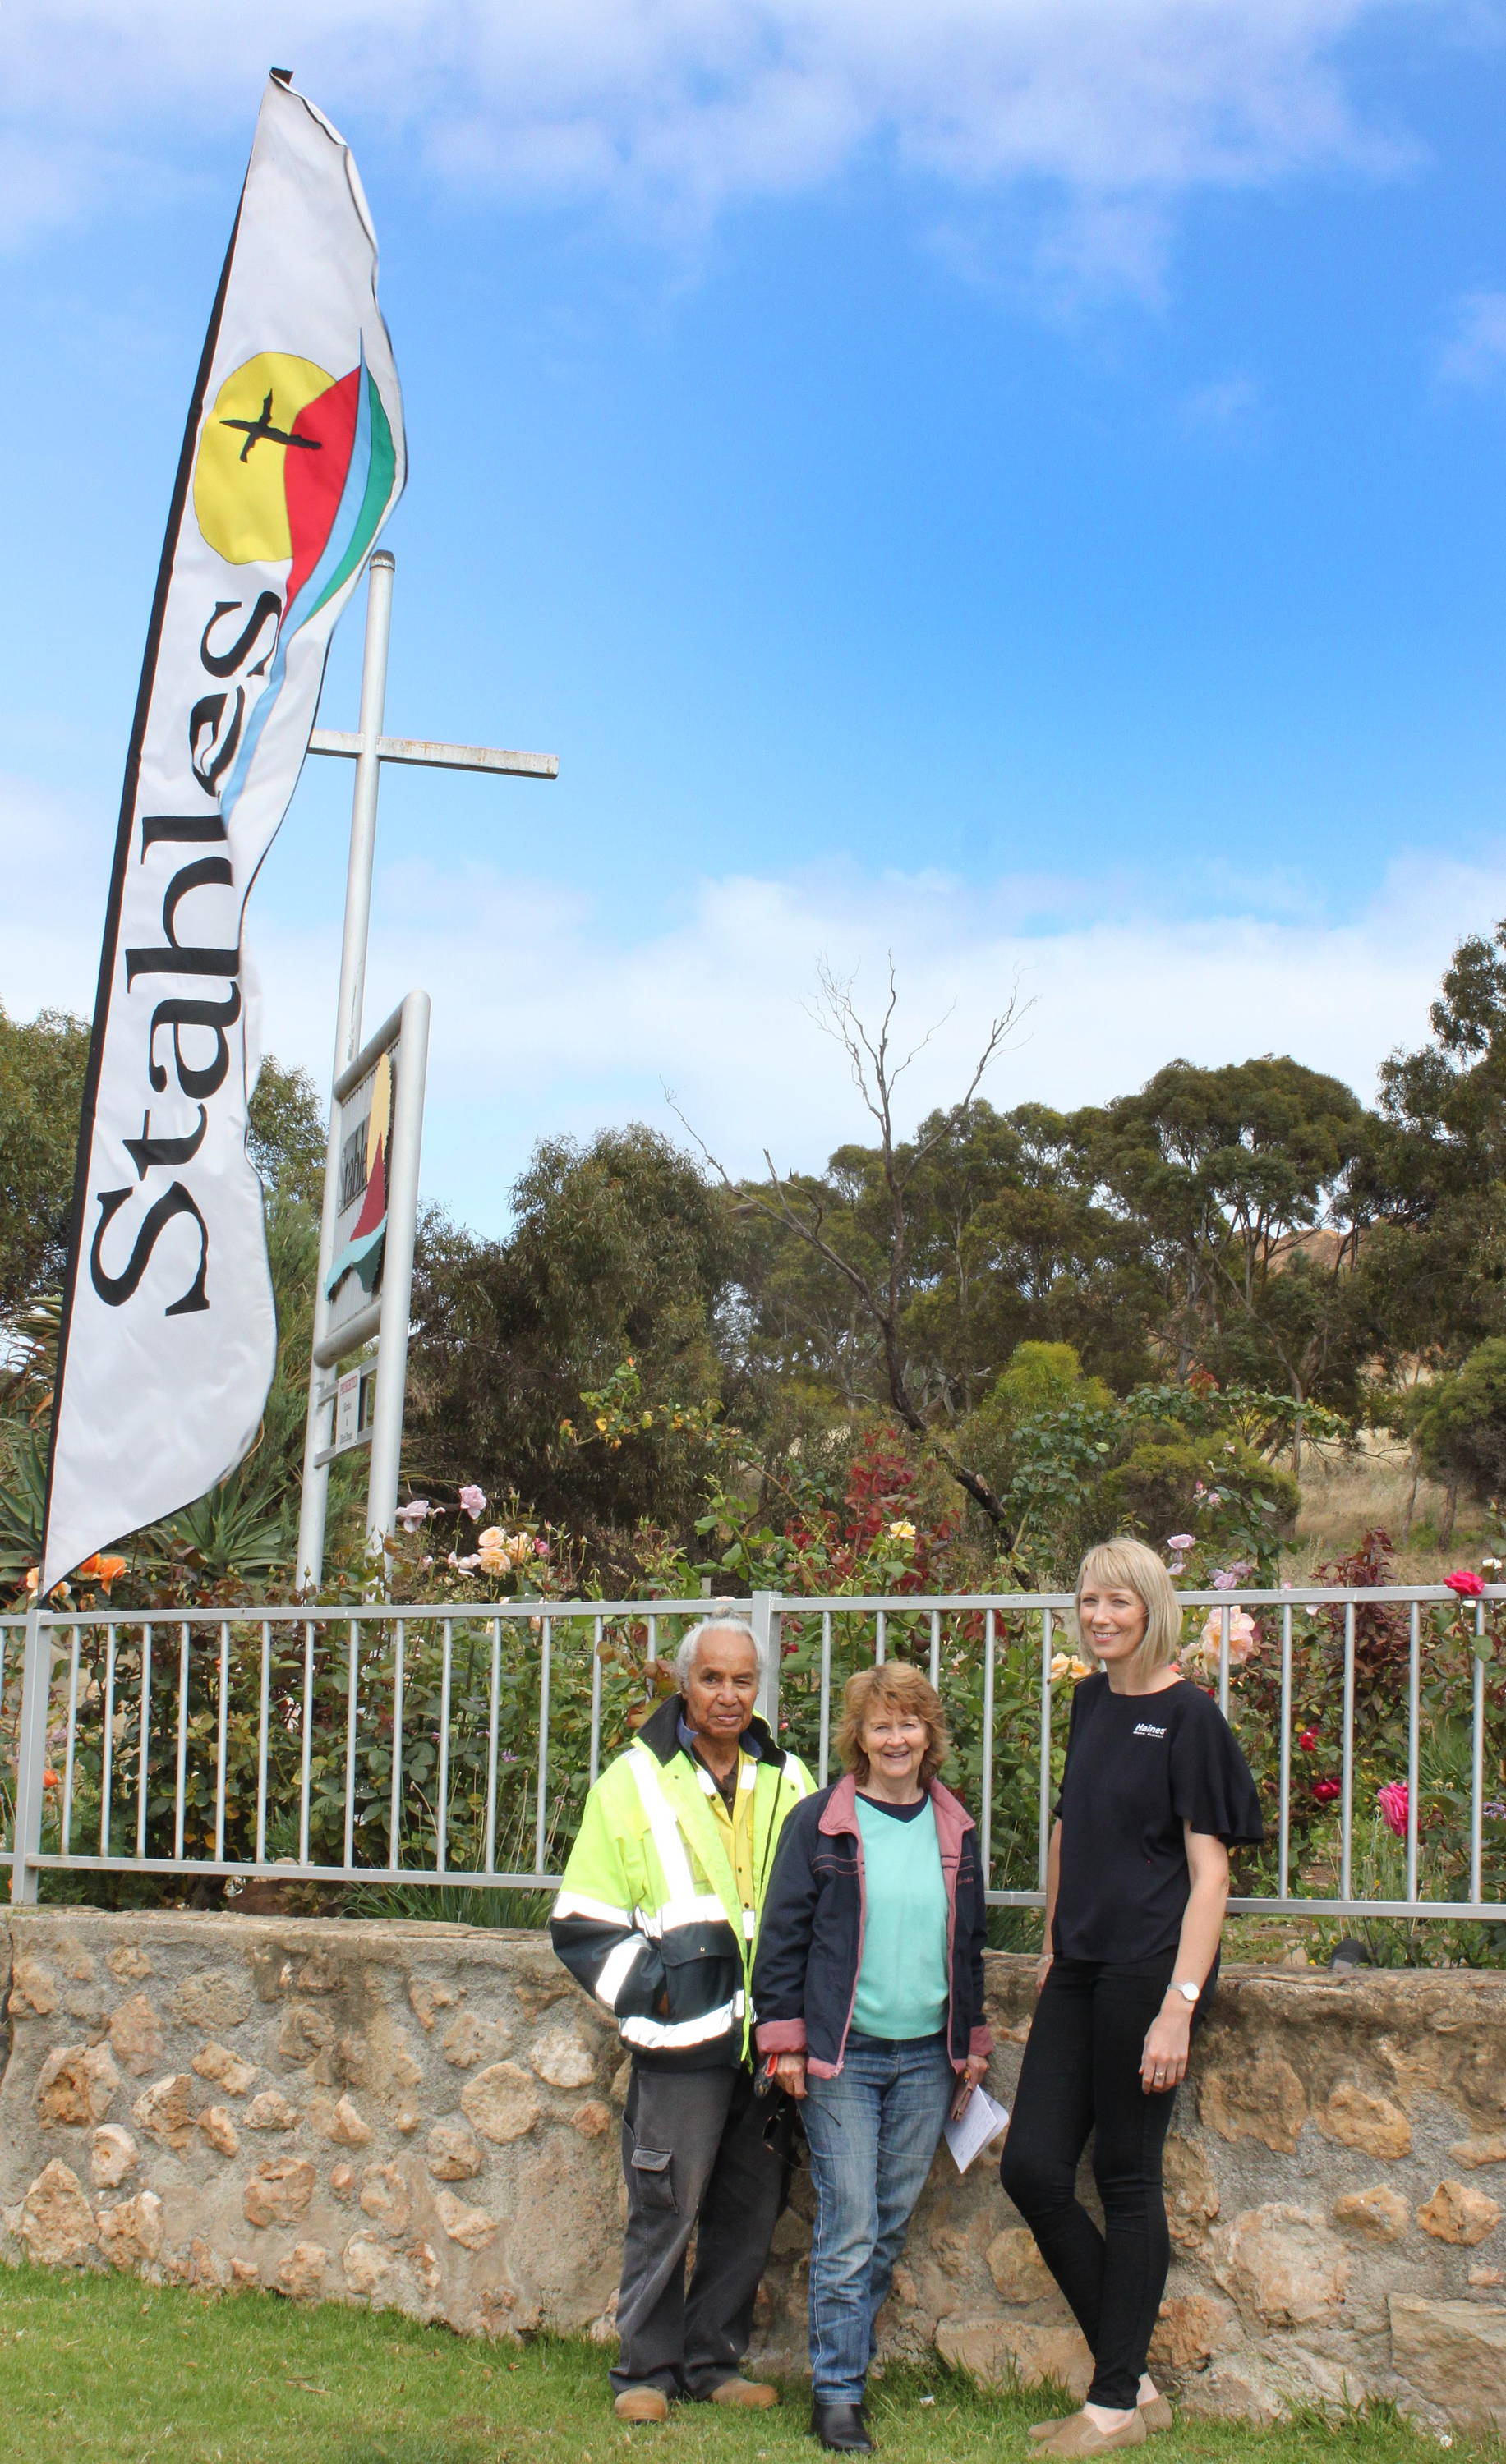 The Stables Christian Centre's Sonny and Lynn Hoet with Laura de Lacy from Haines Medical Australia